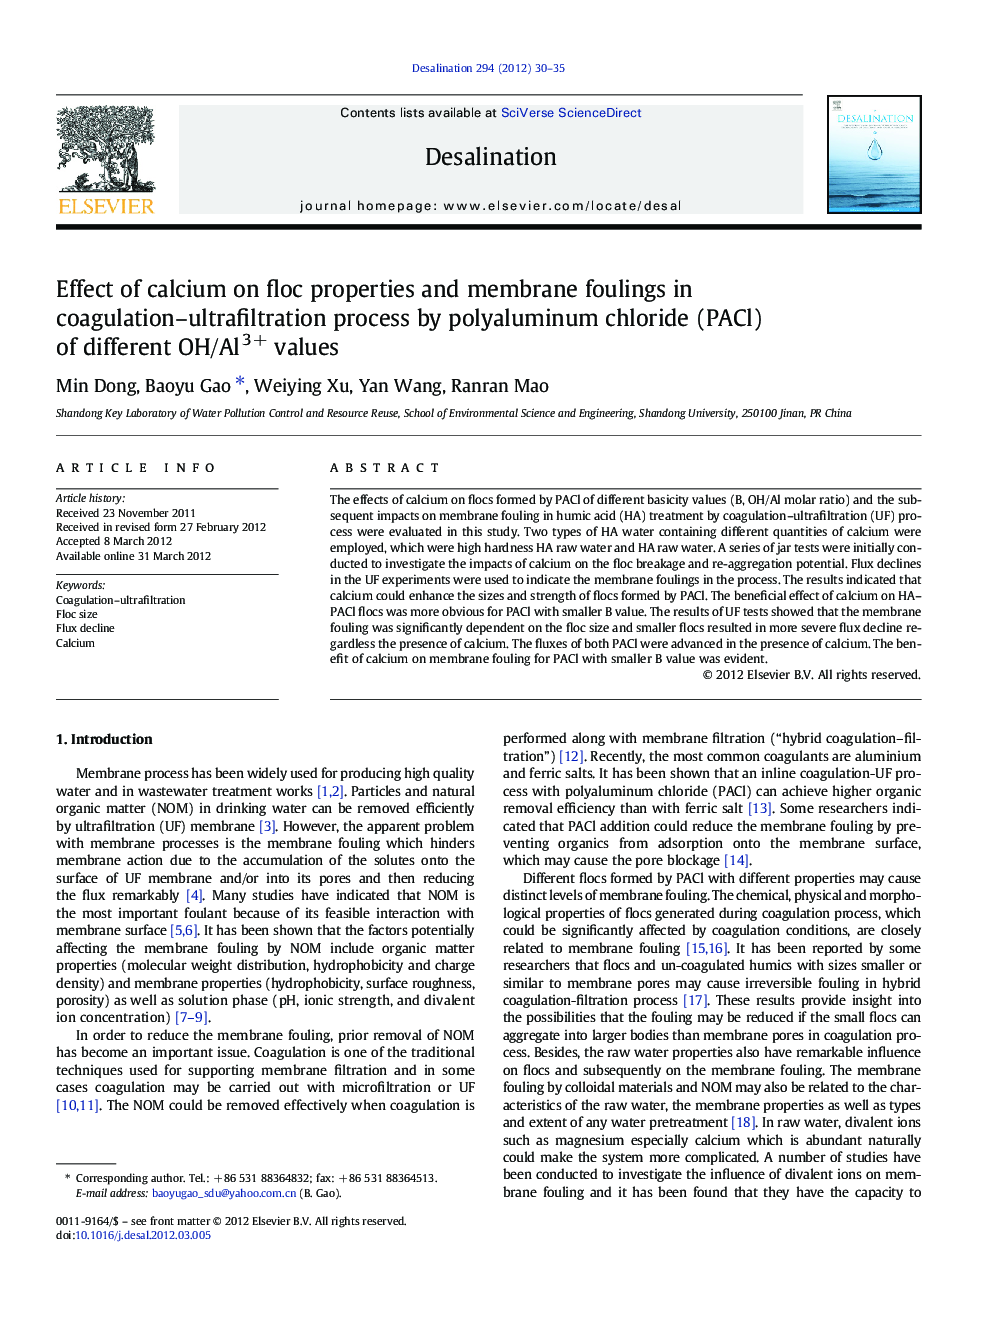 Effect of calcium on floc properties and membrane foulings in coagulation–ultrafiltration process by polyaluminum chloride (PACl) of different OH/Al3+ values